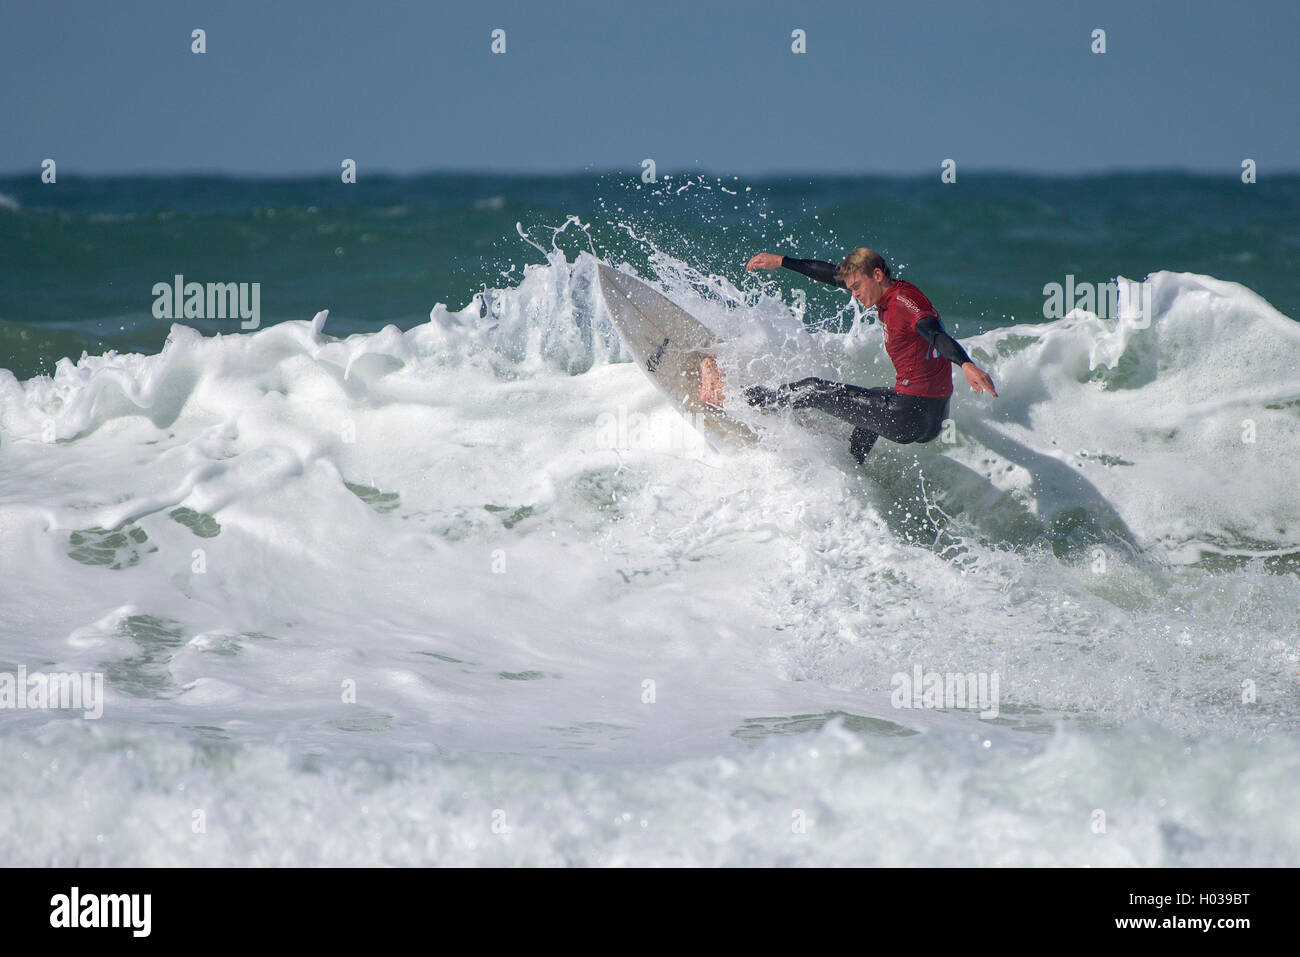 A competitor in spectacular surfing action at the Surfing GB Inter-Clubs Surfing Competition at Fistral in Newquay, Cornwall. UK. Stock Photo